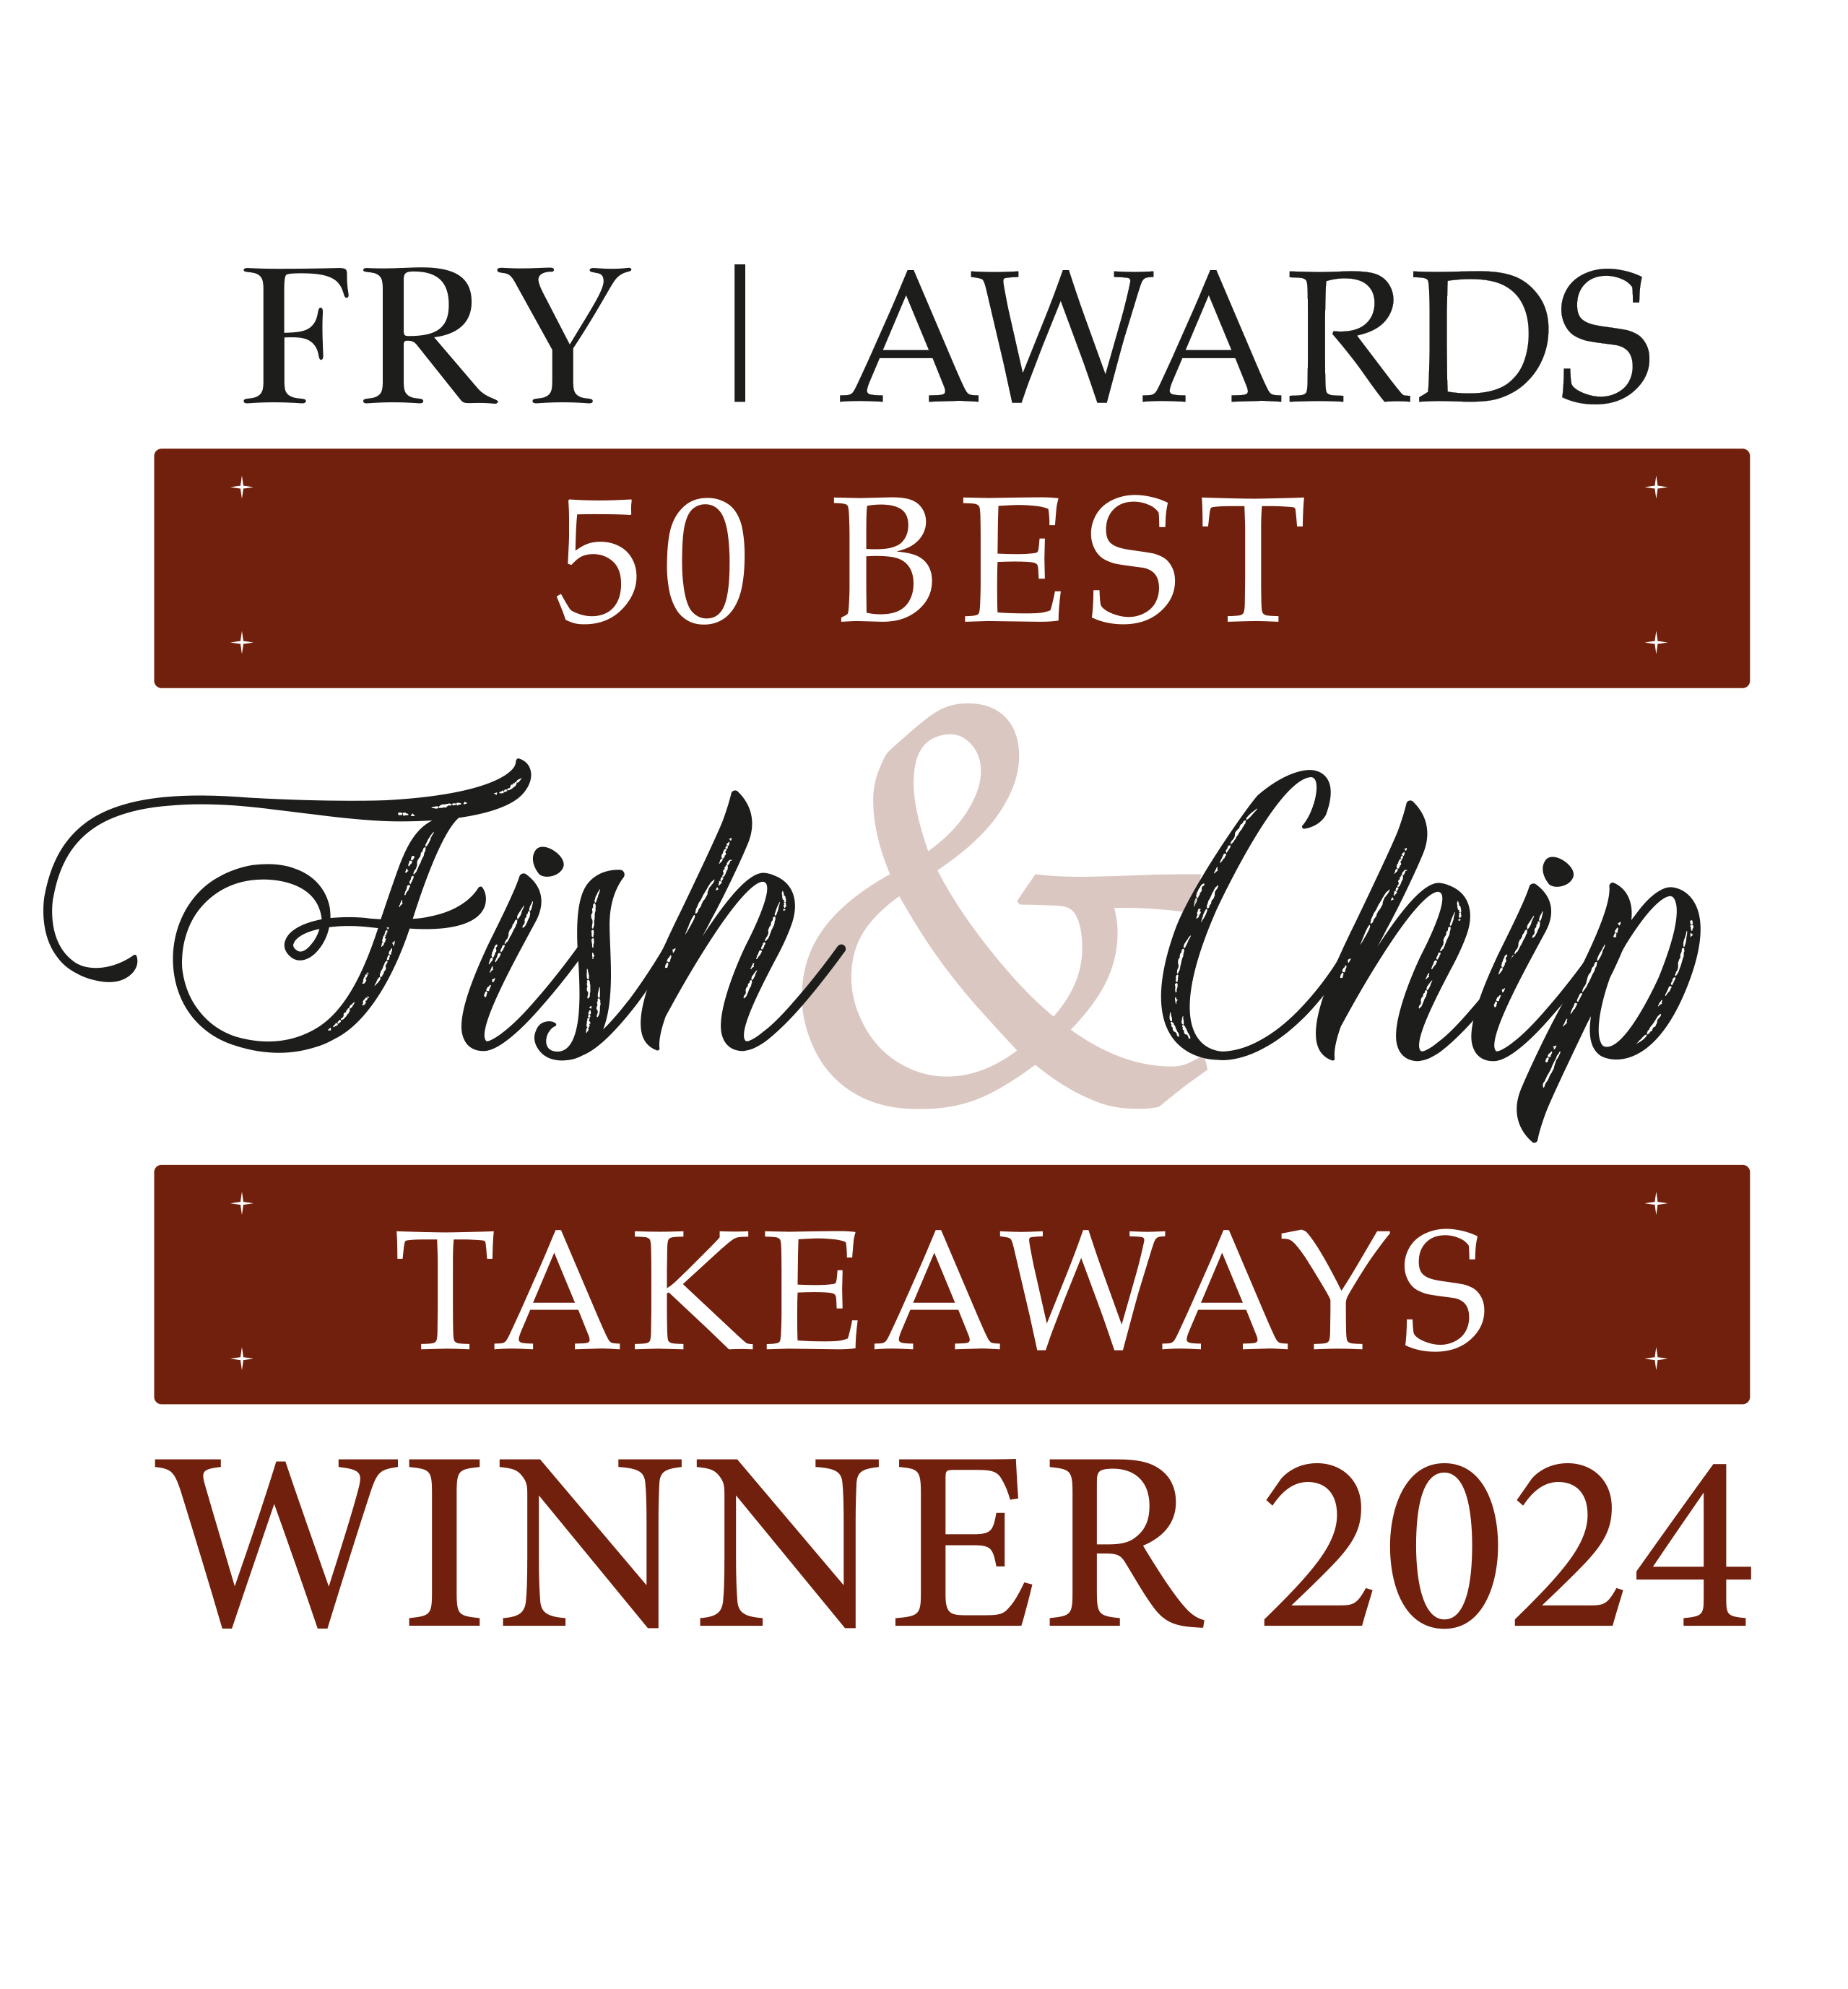 Catch Fish and Chips - Recognised as One of the Top 50 Takeaway Fish & Chip Shops in the UK by Fry Magazine